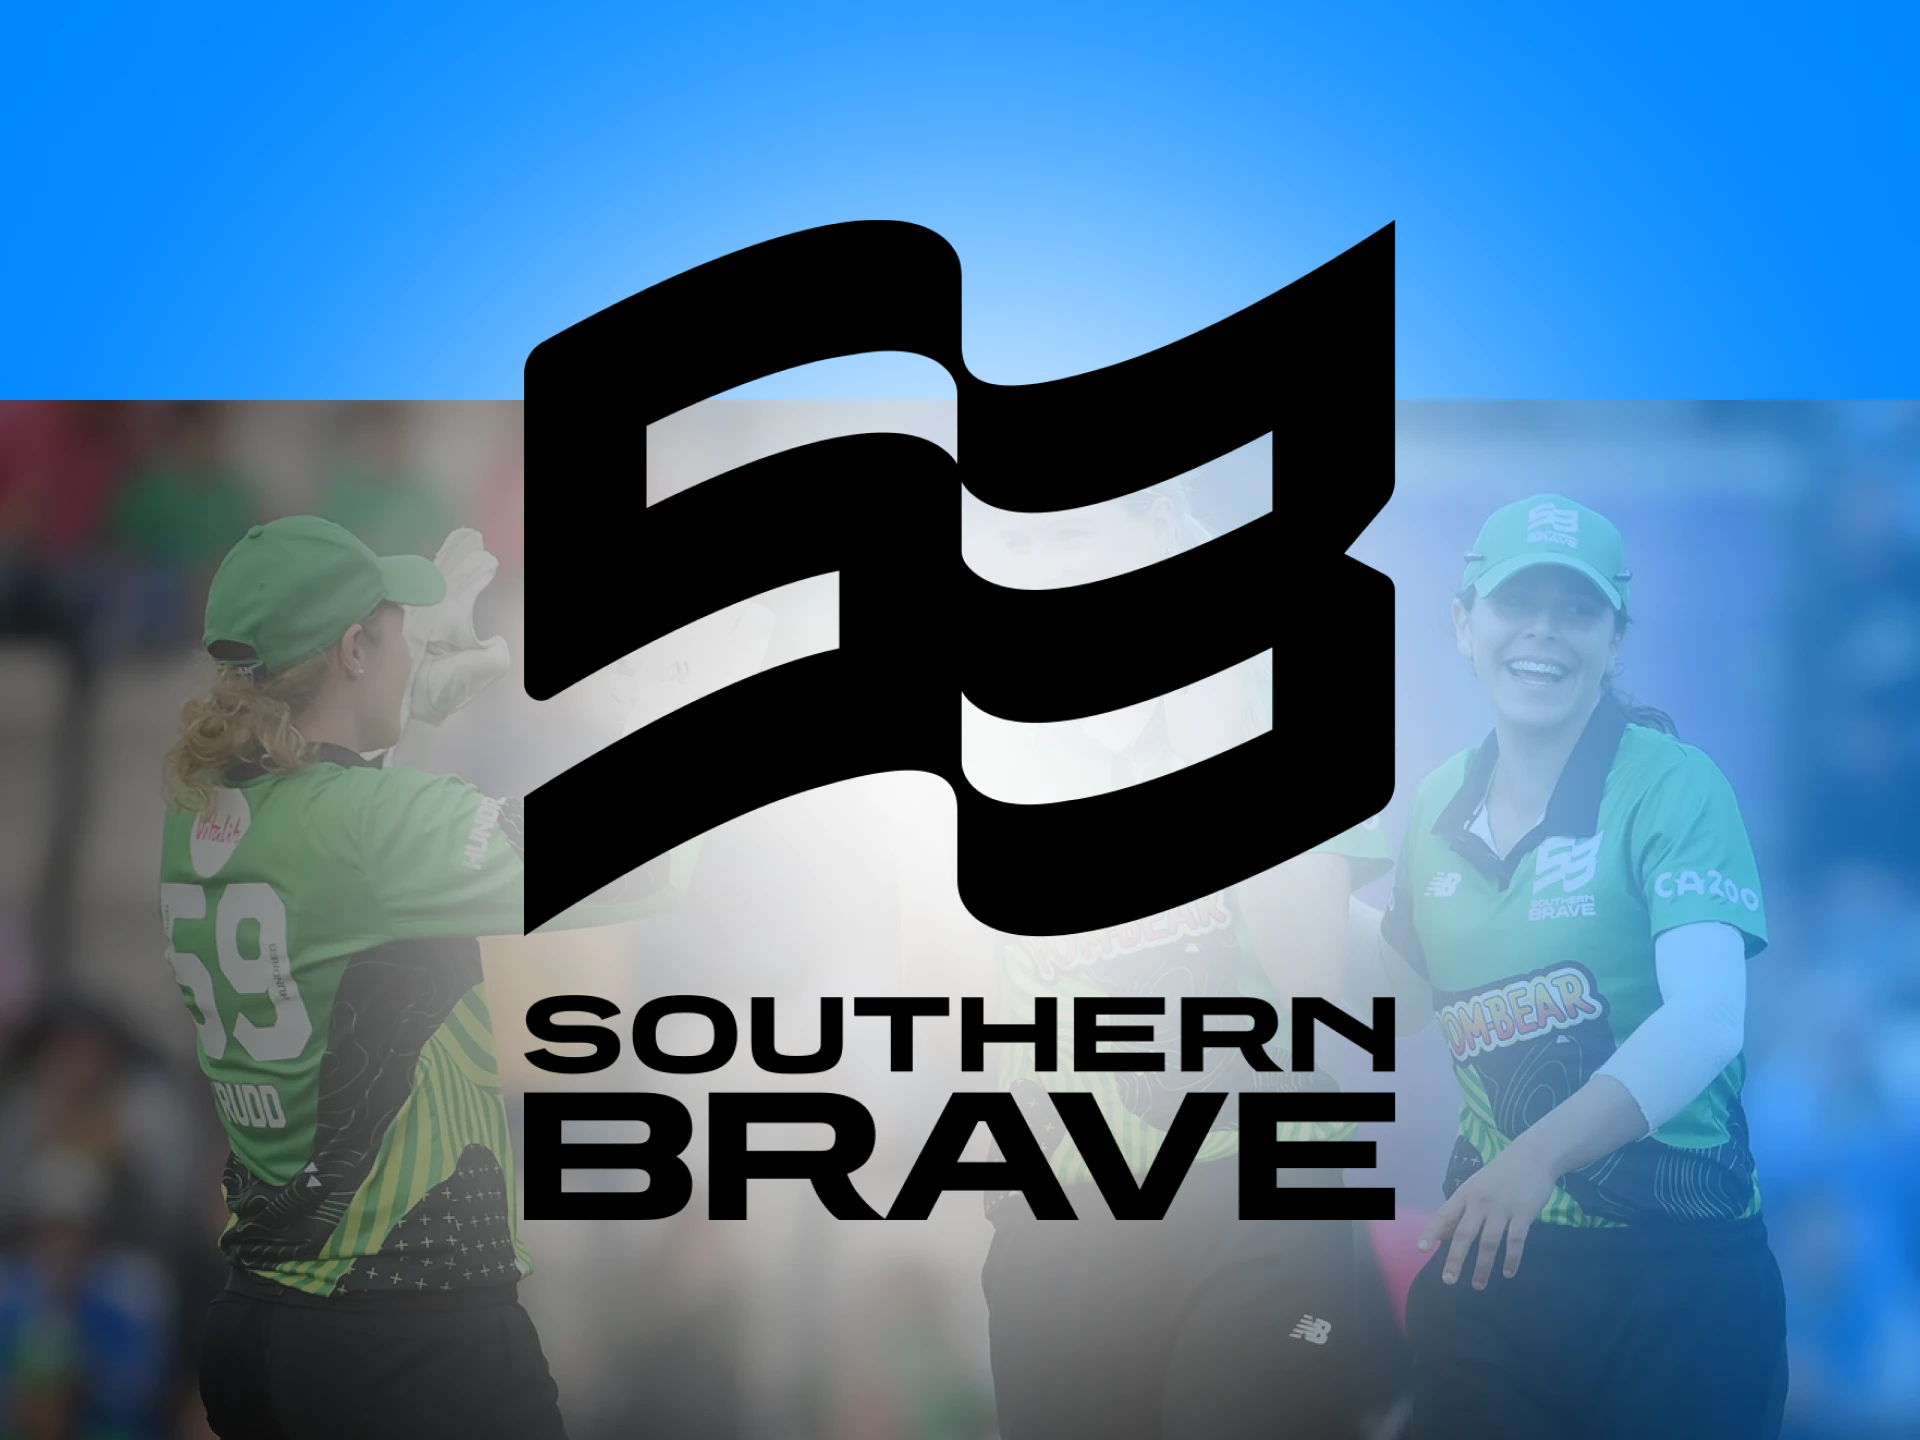 Southern Brave team can win you a lot of betting money.